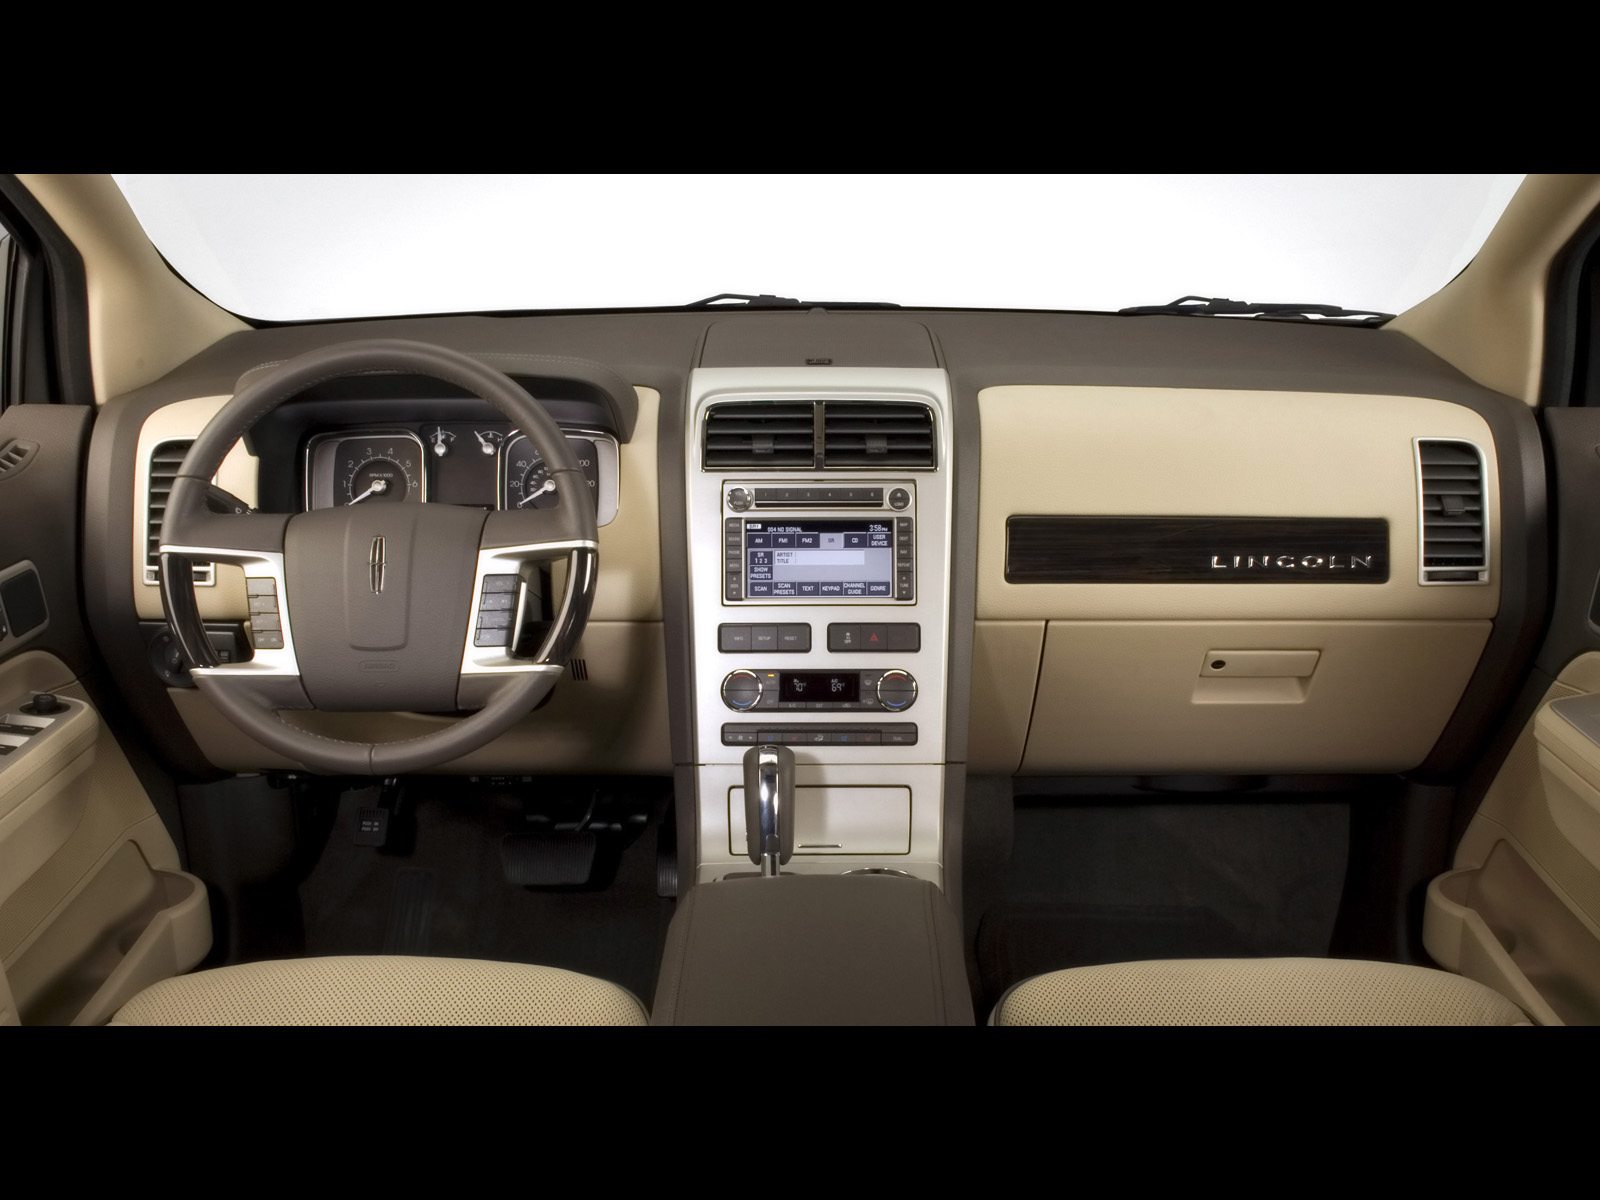 Lincoln MKX: 5 фото